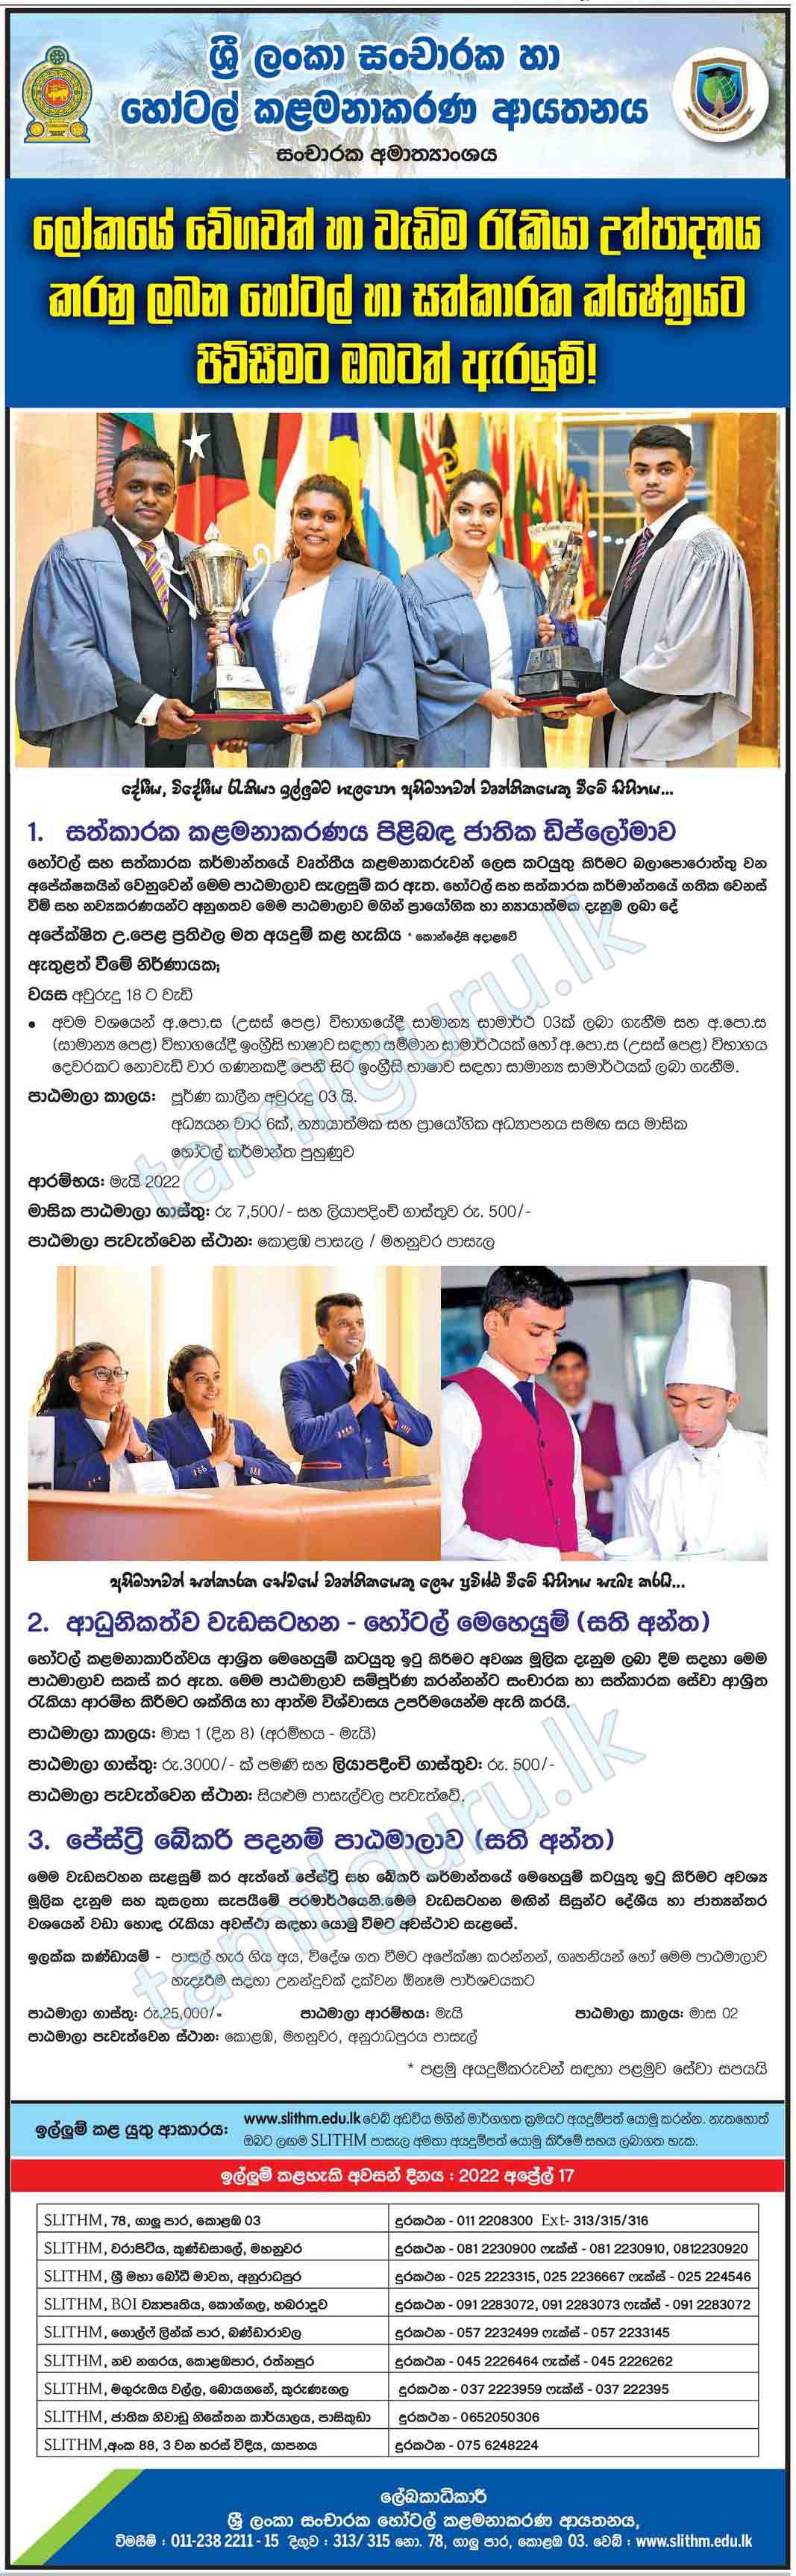 Calling Applications for Courses Conducted by Sri Lanka Institute of Tourism & Hotel Management (SLITHM) - 2022 (Notice in Sinhala)